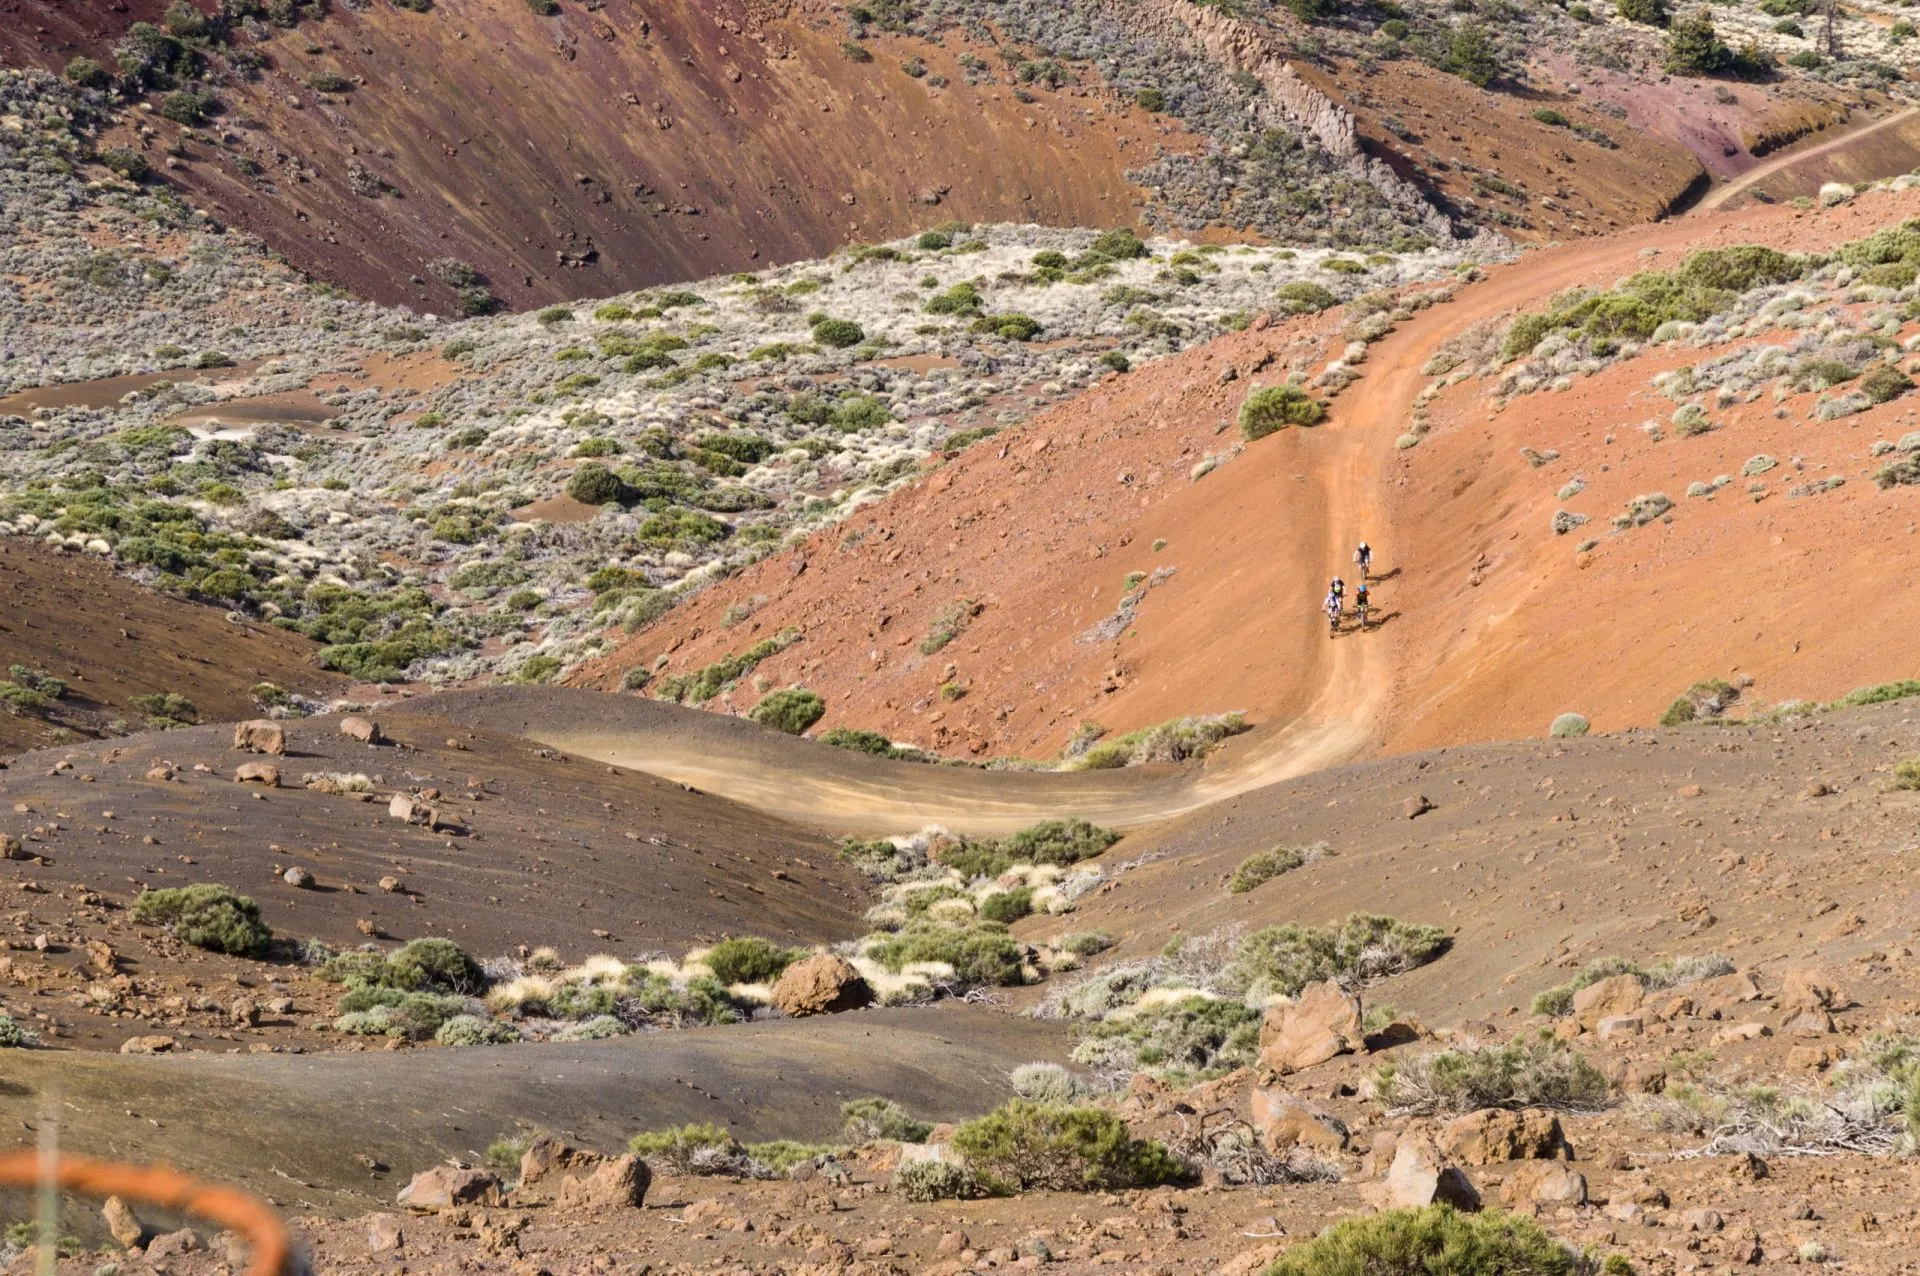 Four mountain-bike riders on extreme volcanic road